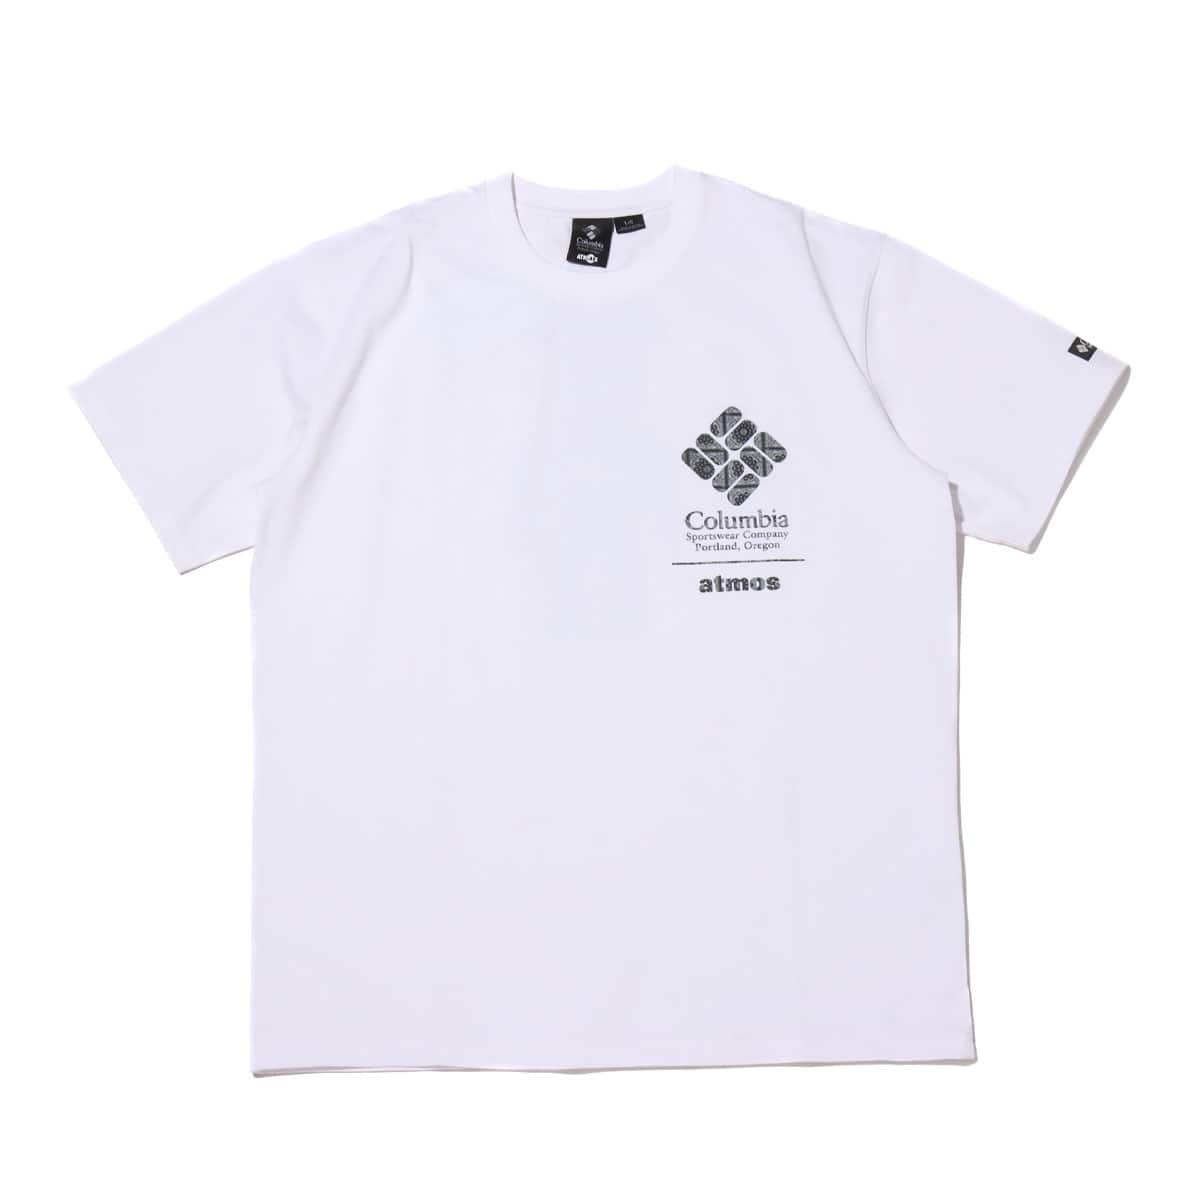 Columbia x atmos x BE@RBRICK Hype wolf™ S/S Tee WHITE 21SP-S